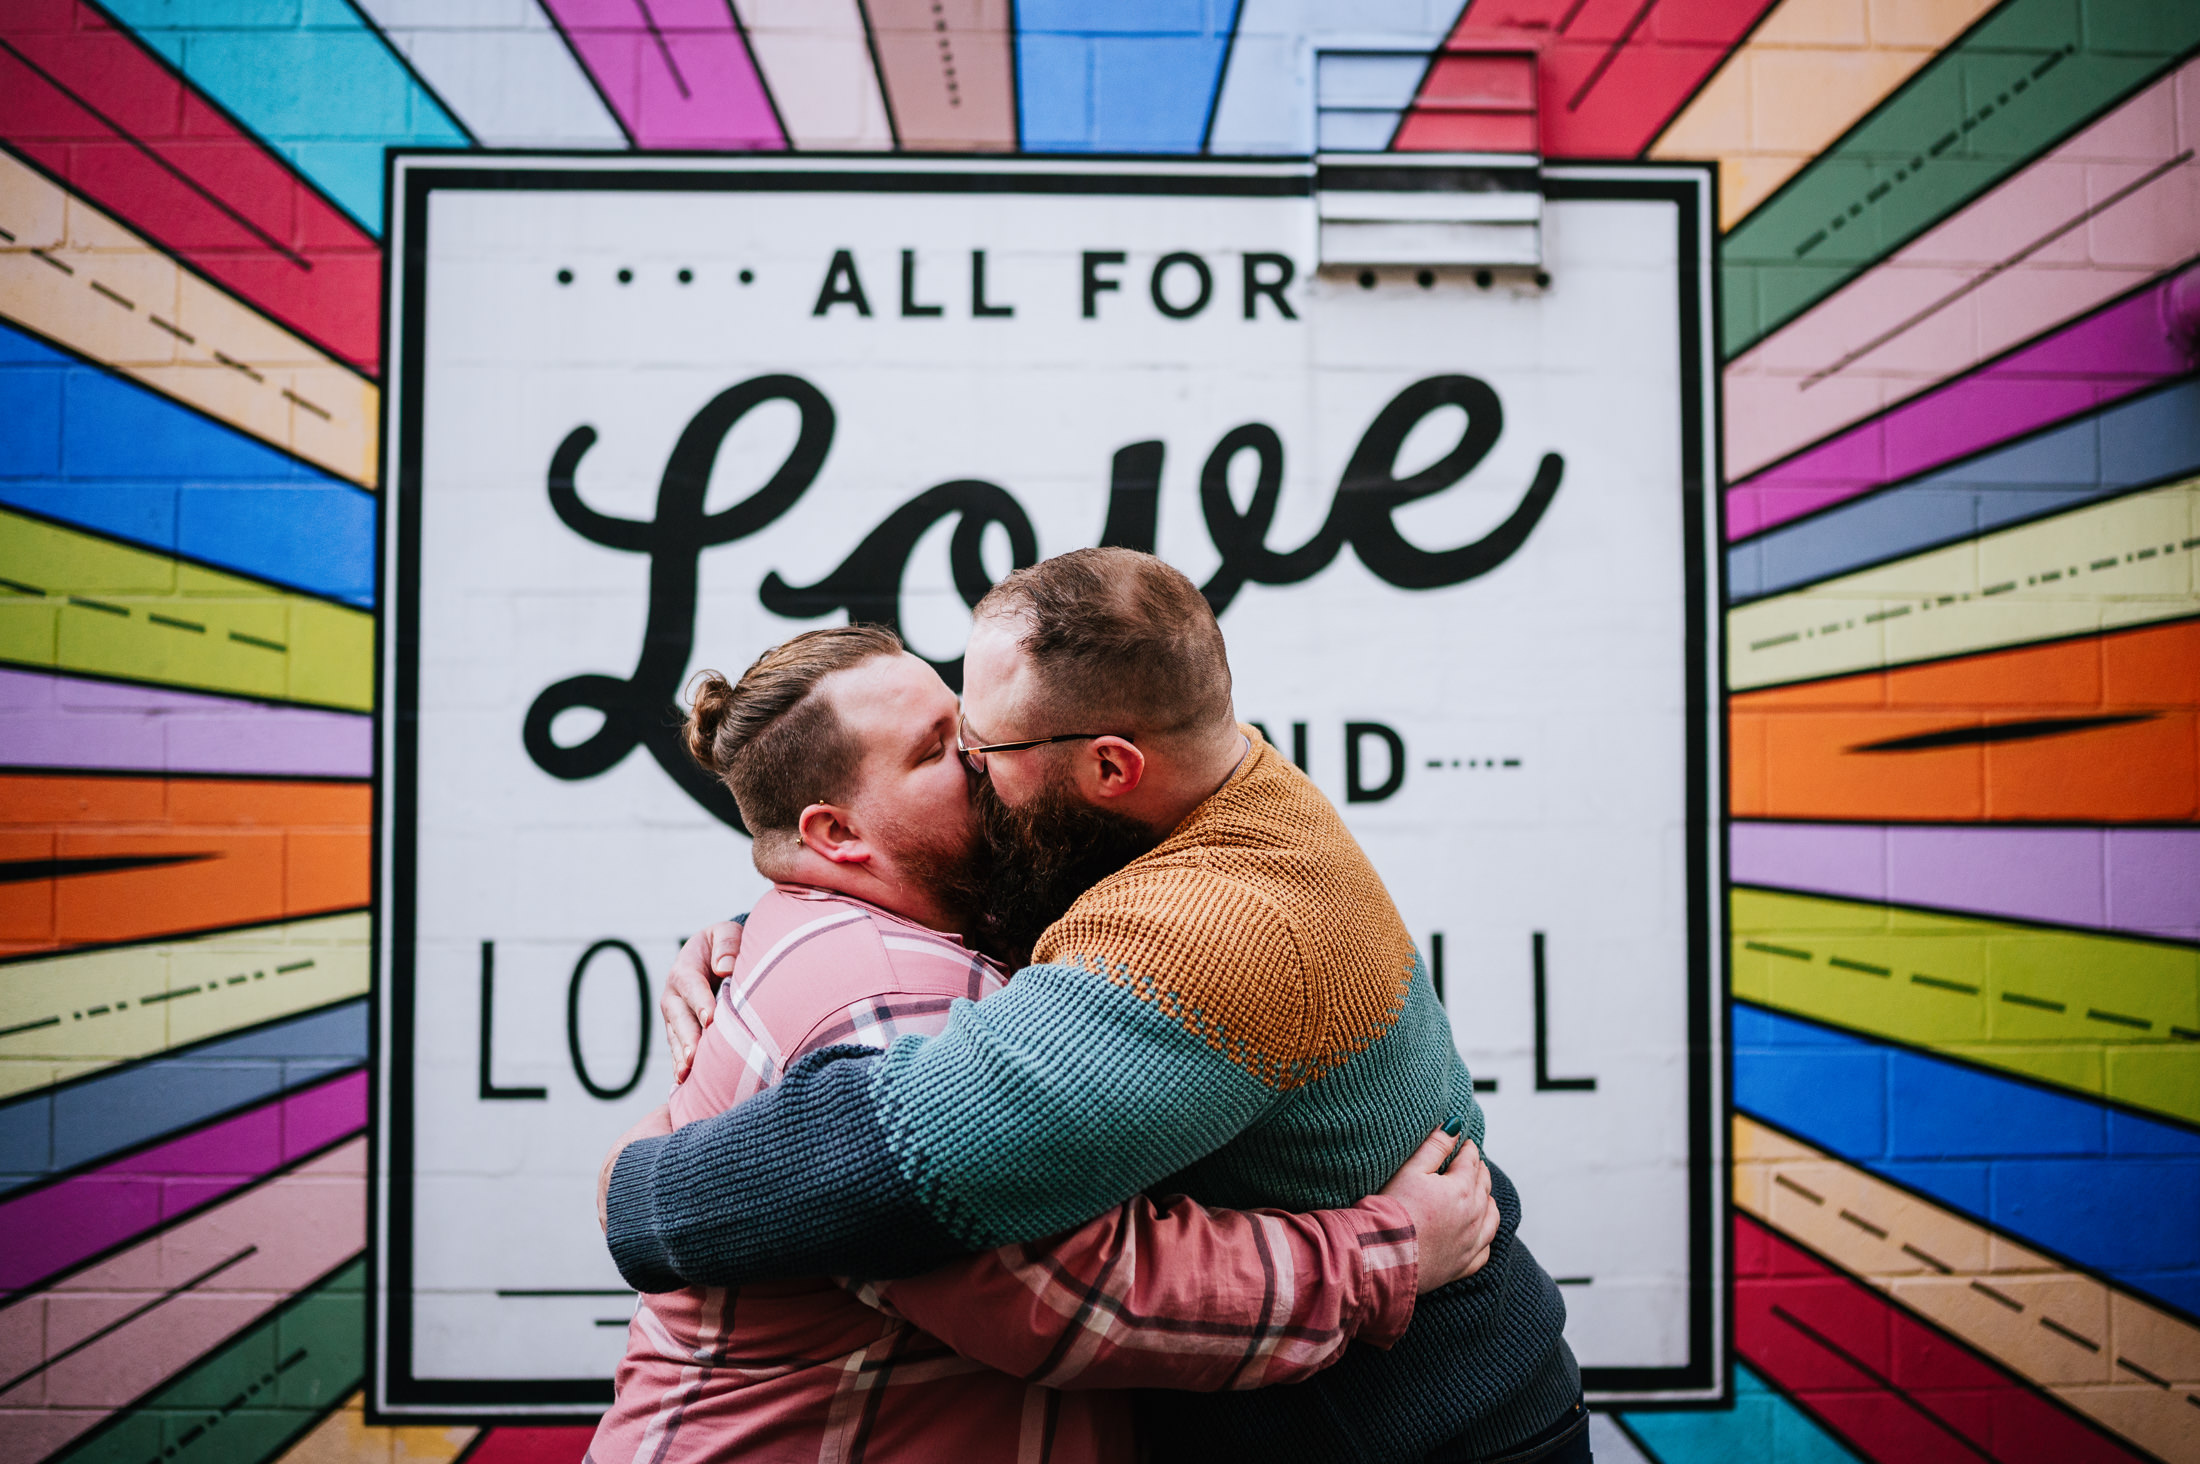 Two partners embracing in front of a colorful mural stating "All For Love And Love For All".